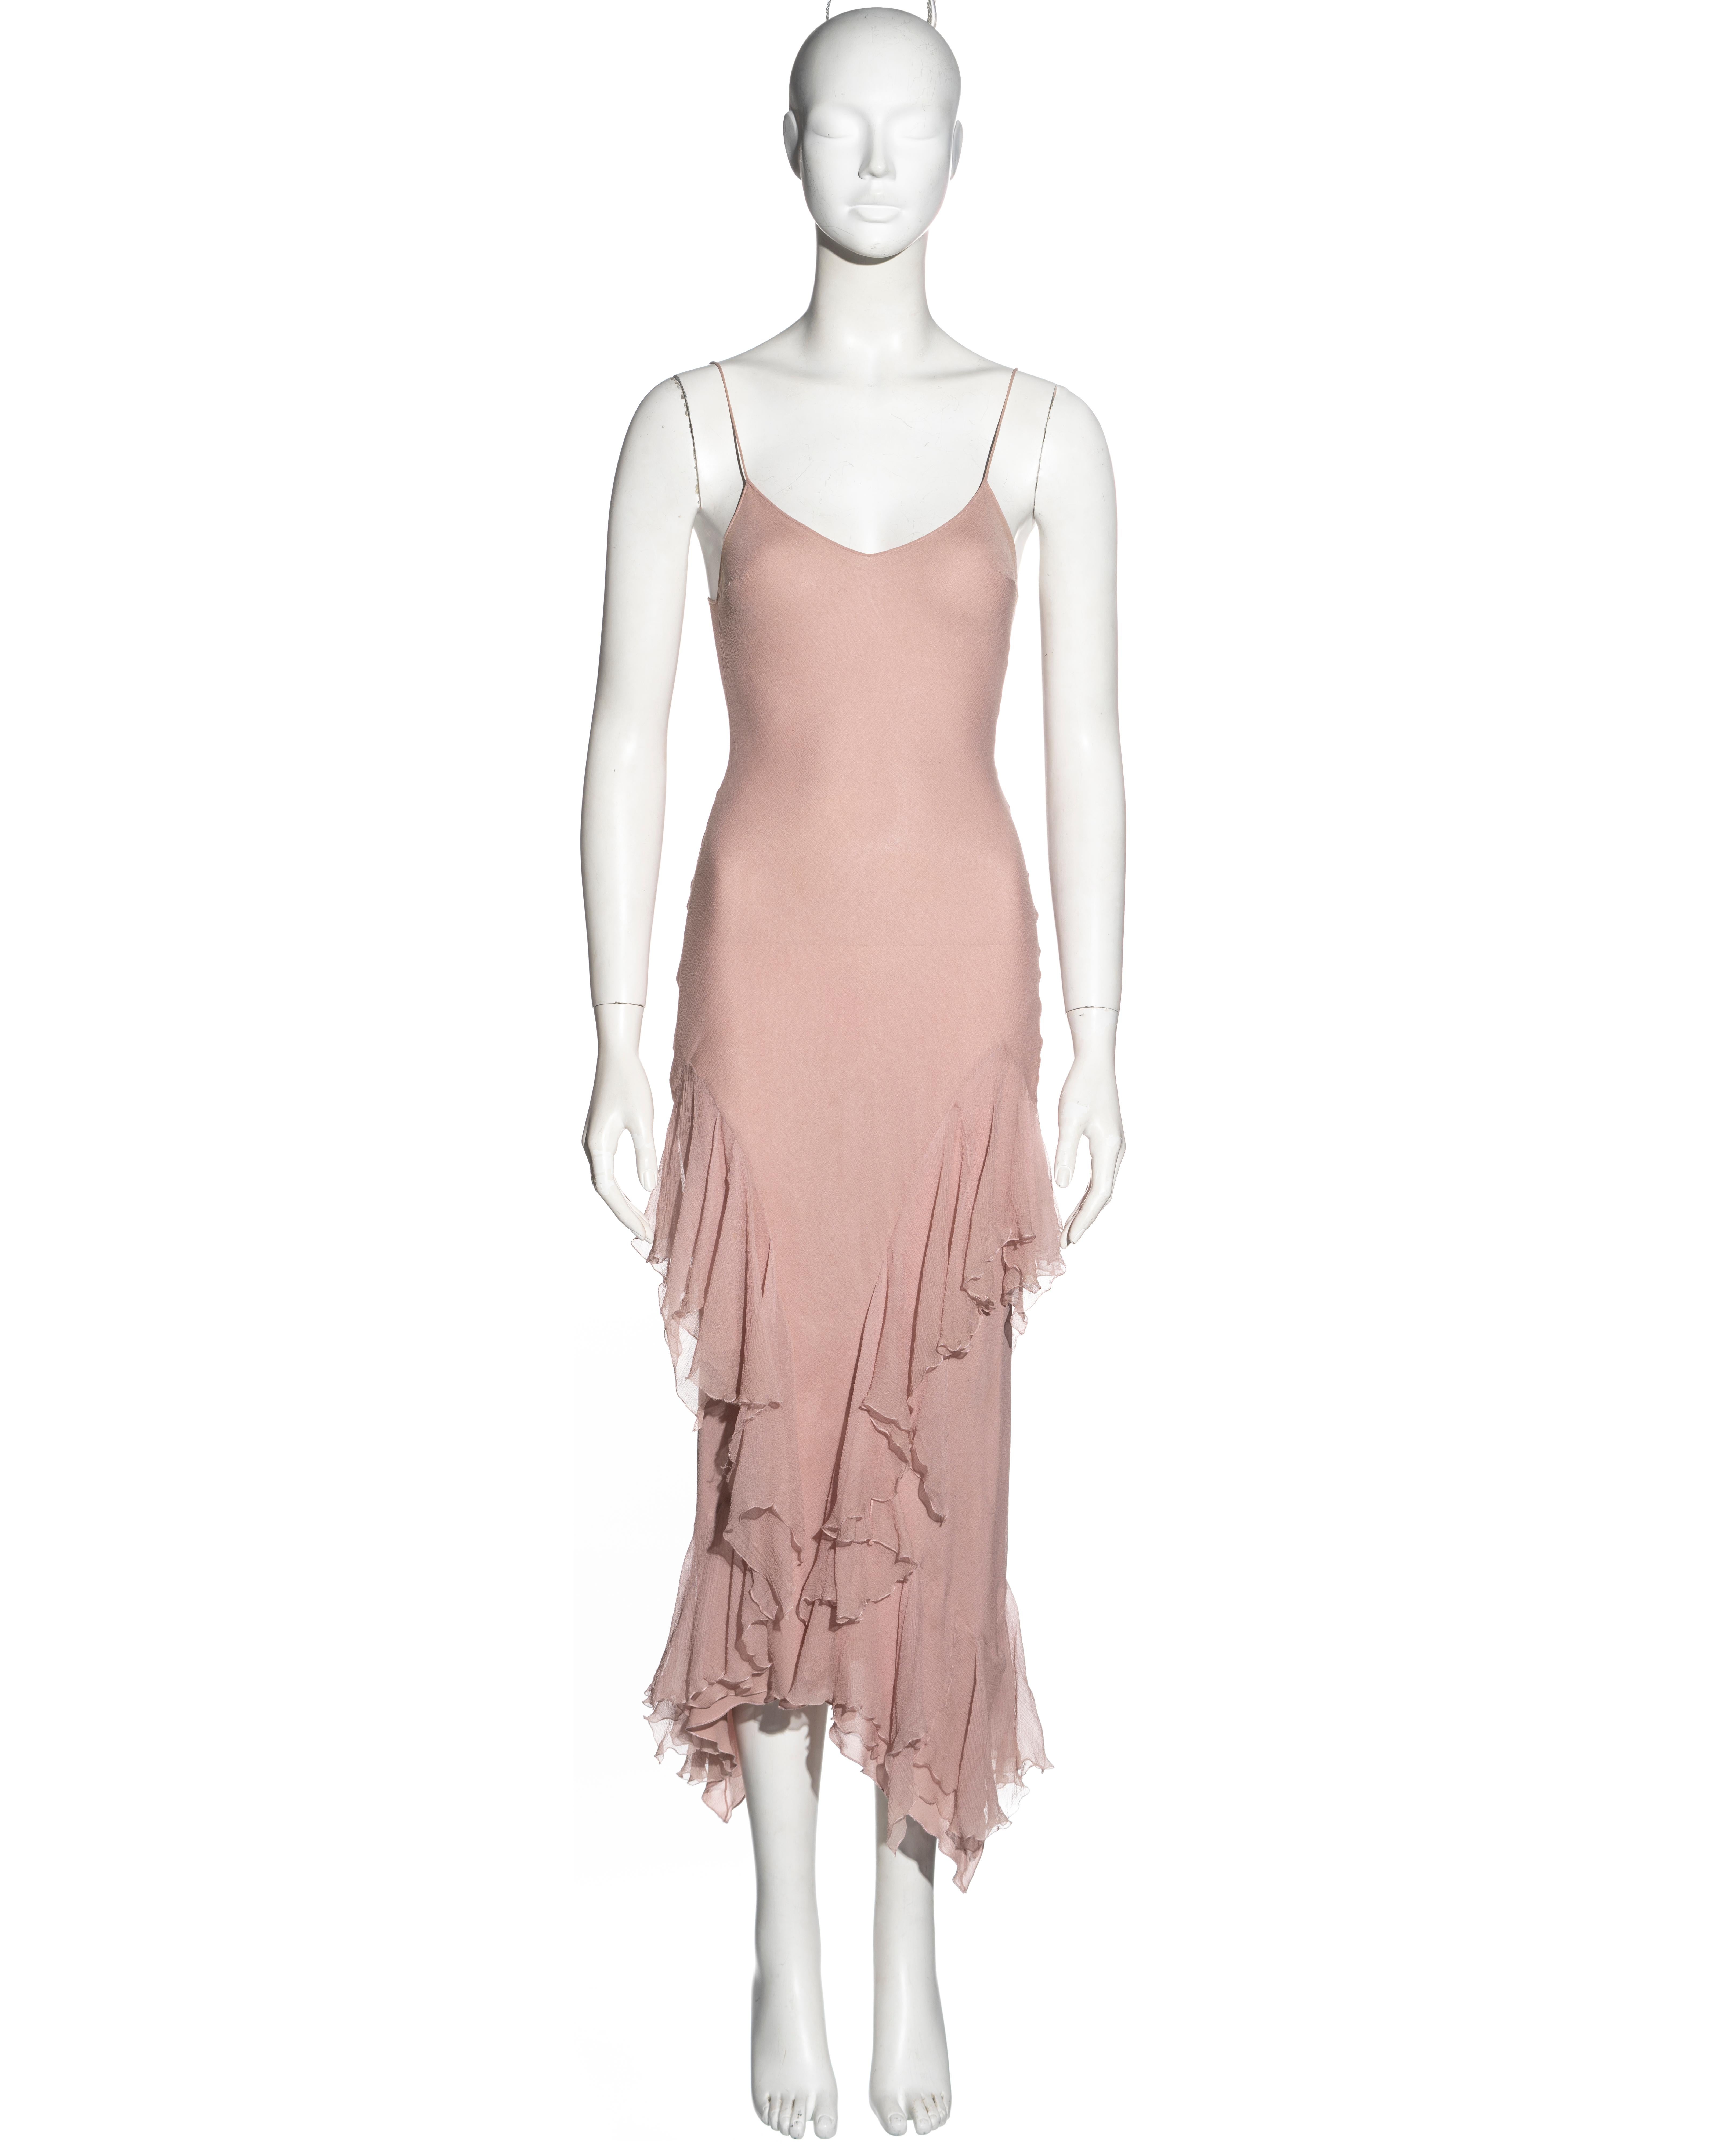 ▪ John Galliano evening dress
▪ Constructed from bias-cut pale pink silk chiffon 
▪ Asymmetric ruffled skirt
▪ V-neck
▪ Spaghetti straps 
▪ FR 38 - UK 10 - US 6
▪ Fall-Winter 1997
▪ 100% Silk
▪ Made in France

All photographs in this listing